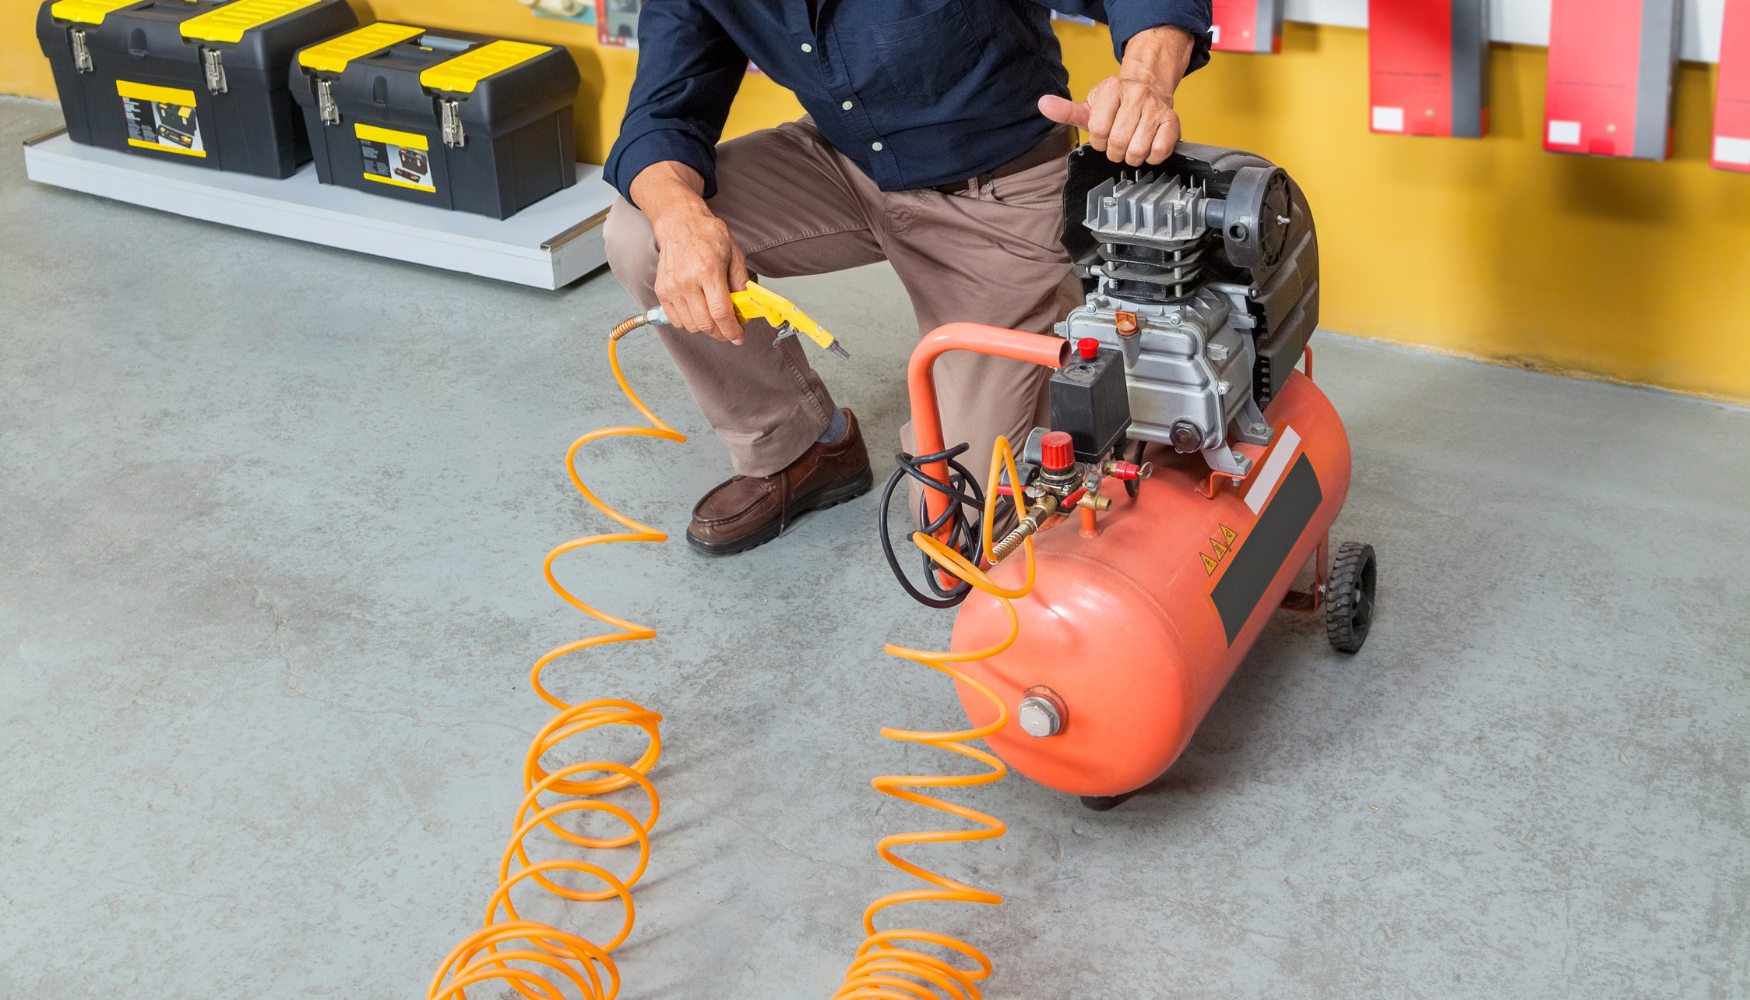 Portable Air Compressor: The Powerhouse for Pneumatic Tools